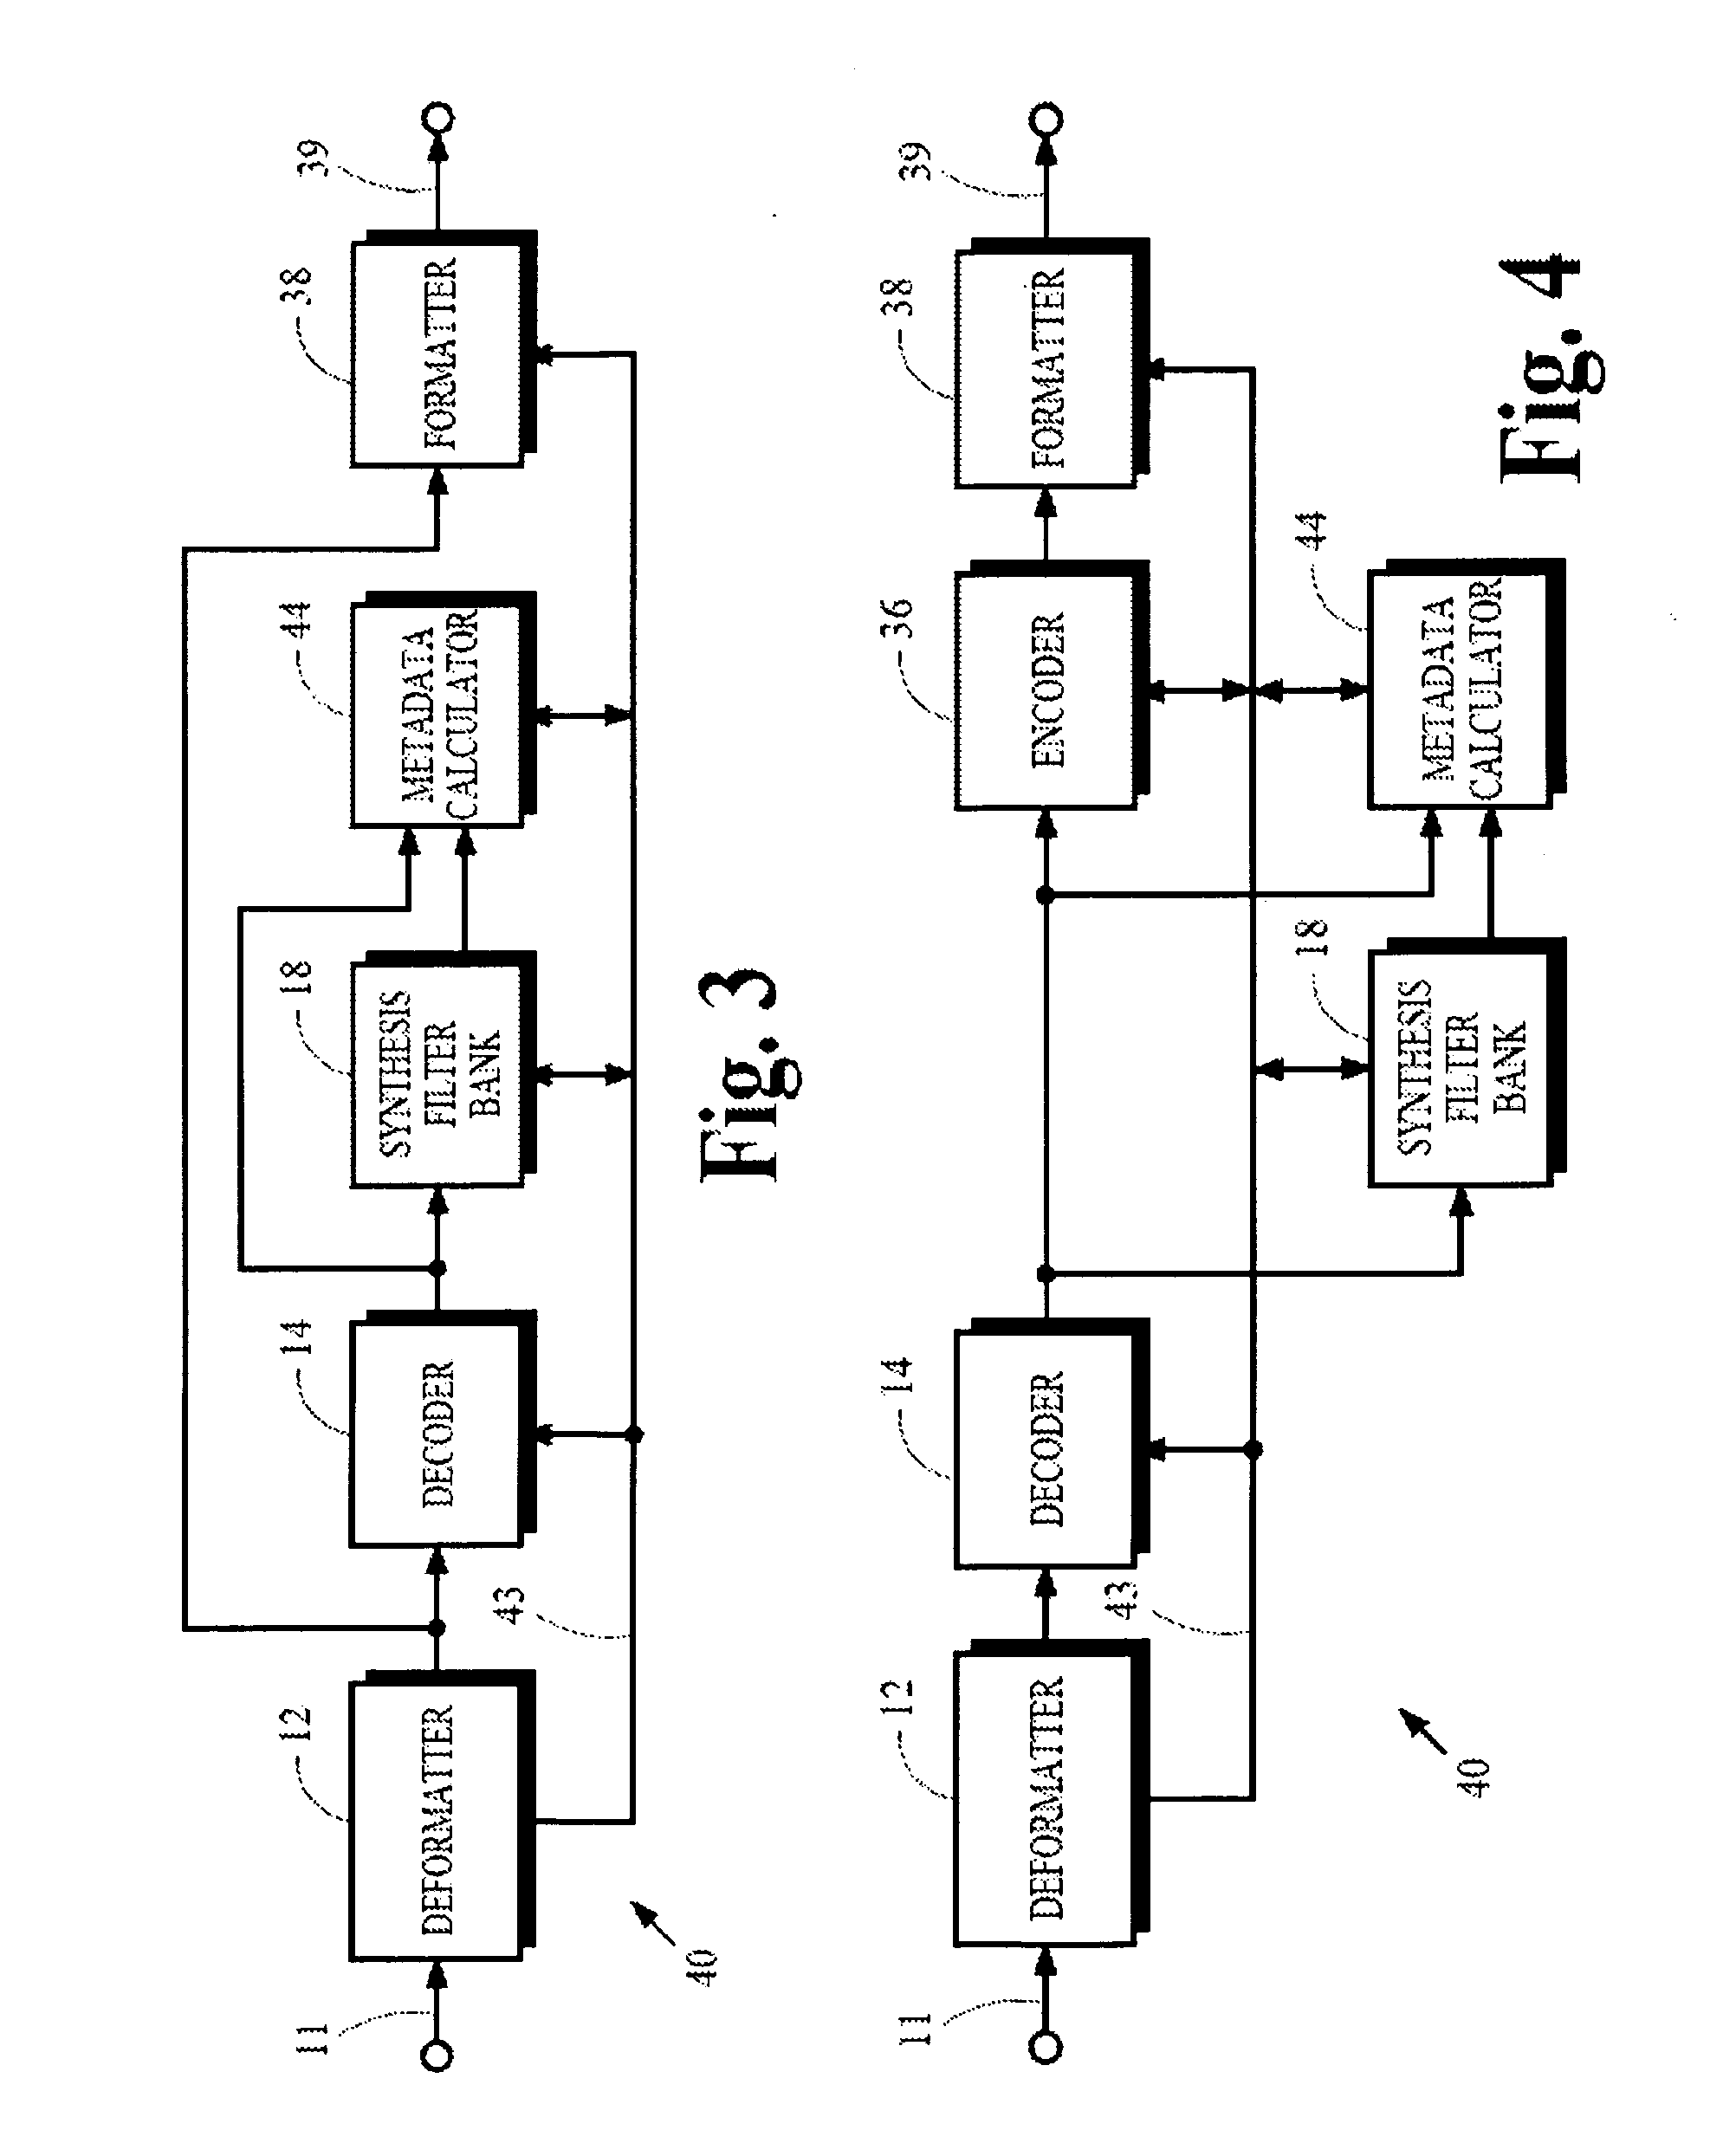 System and Method for Non-destructively Normalizing Loudness of Audio Signals Within Portable Devices